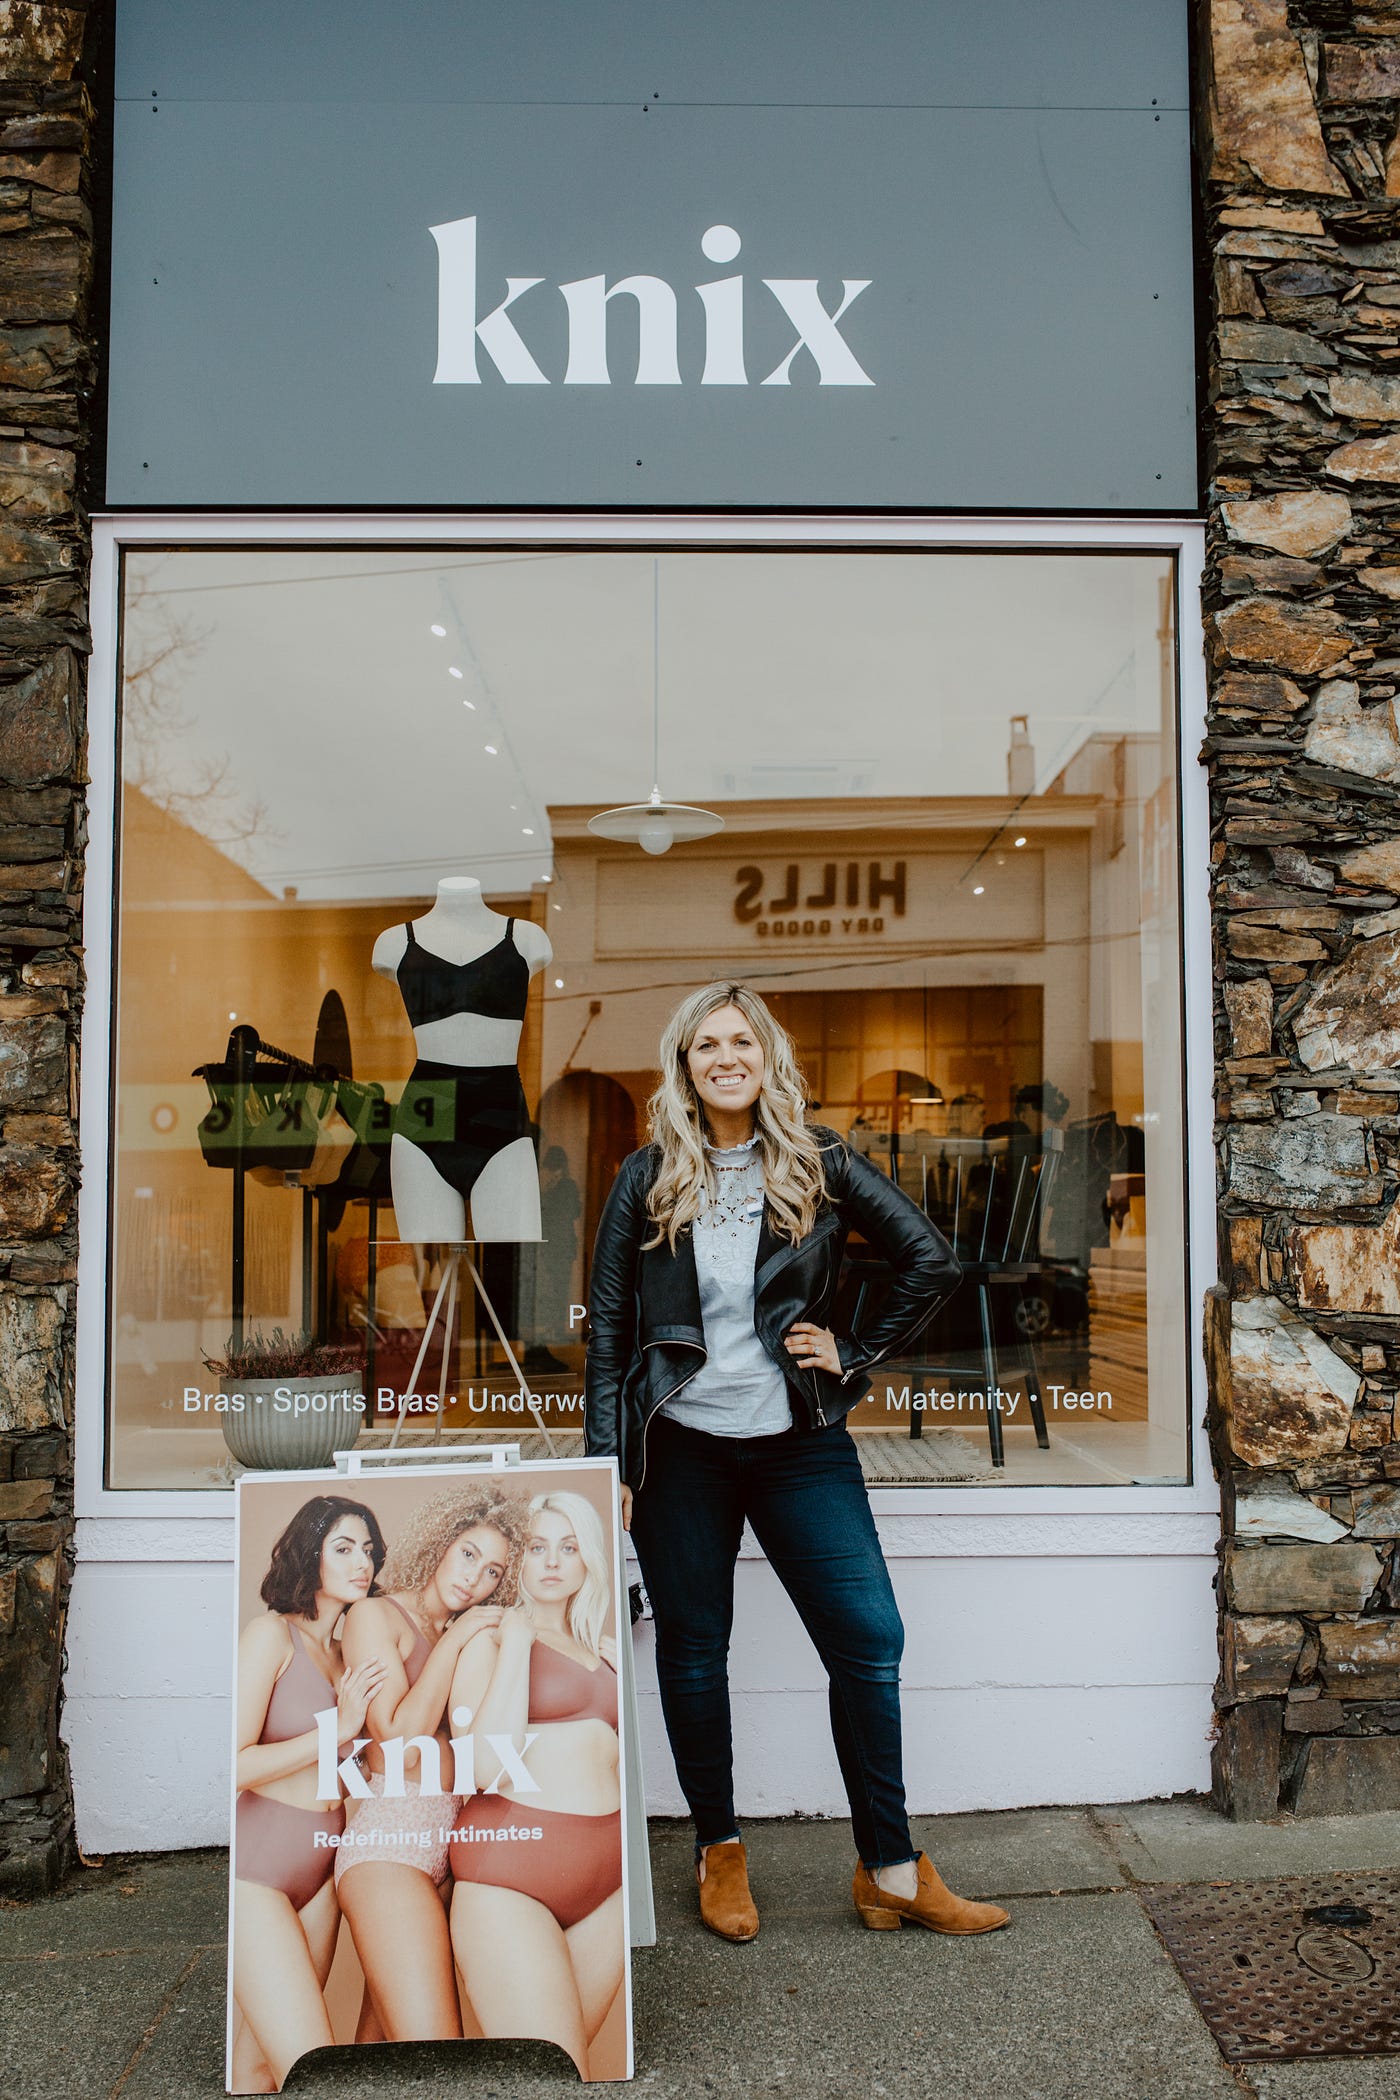 EcoLux☆Lifestyle: Knix Intimates Now Offers Offline Shopping in Kitsilano, by Helen Siwak, ECOLUX☆LIFESTYLE.CO